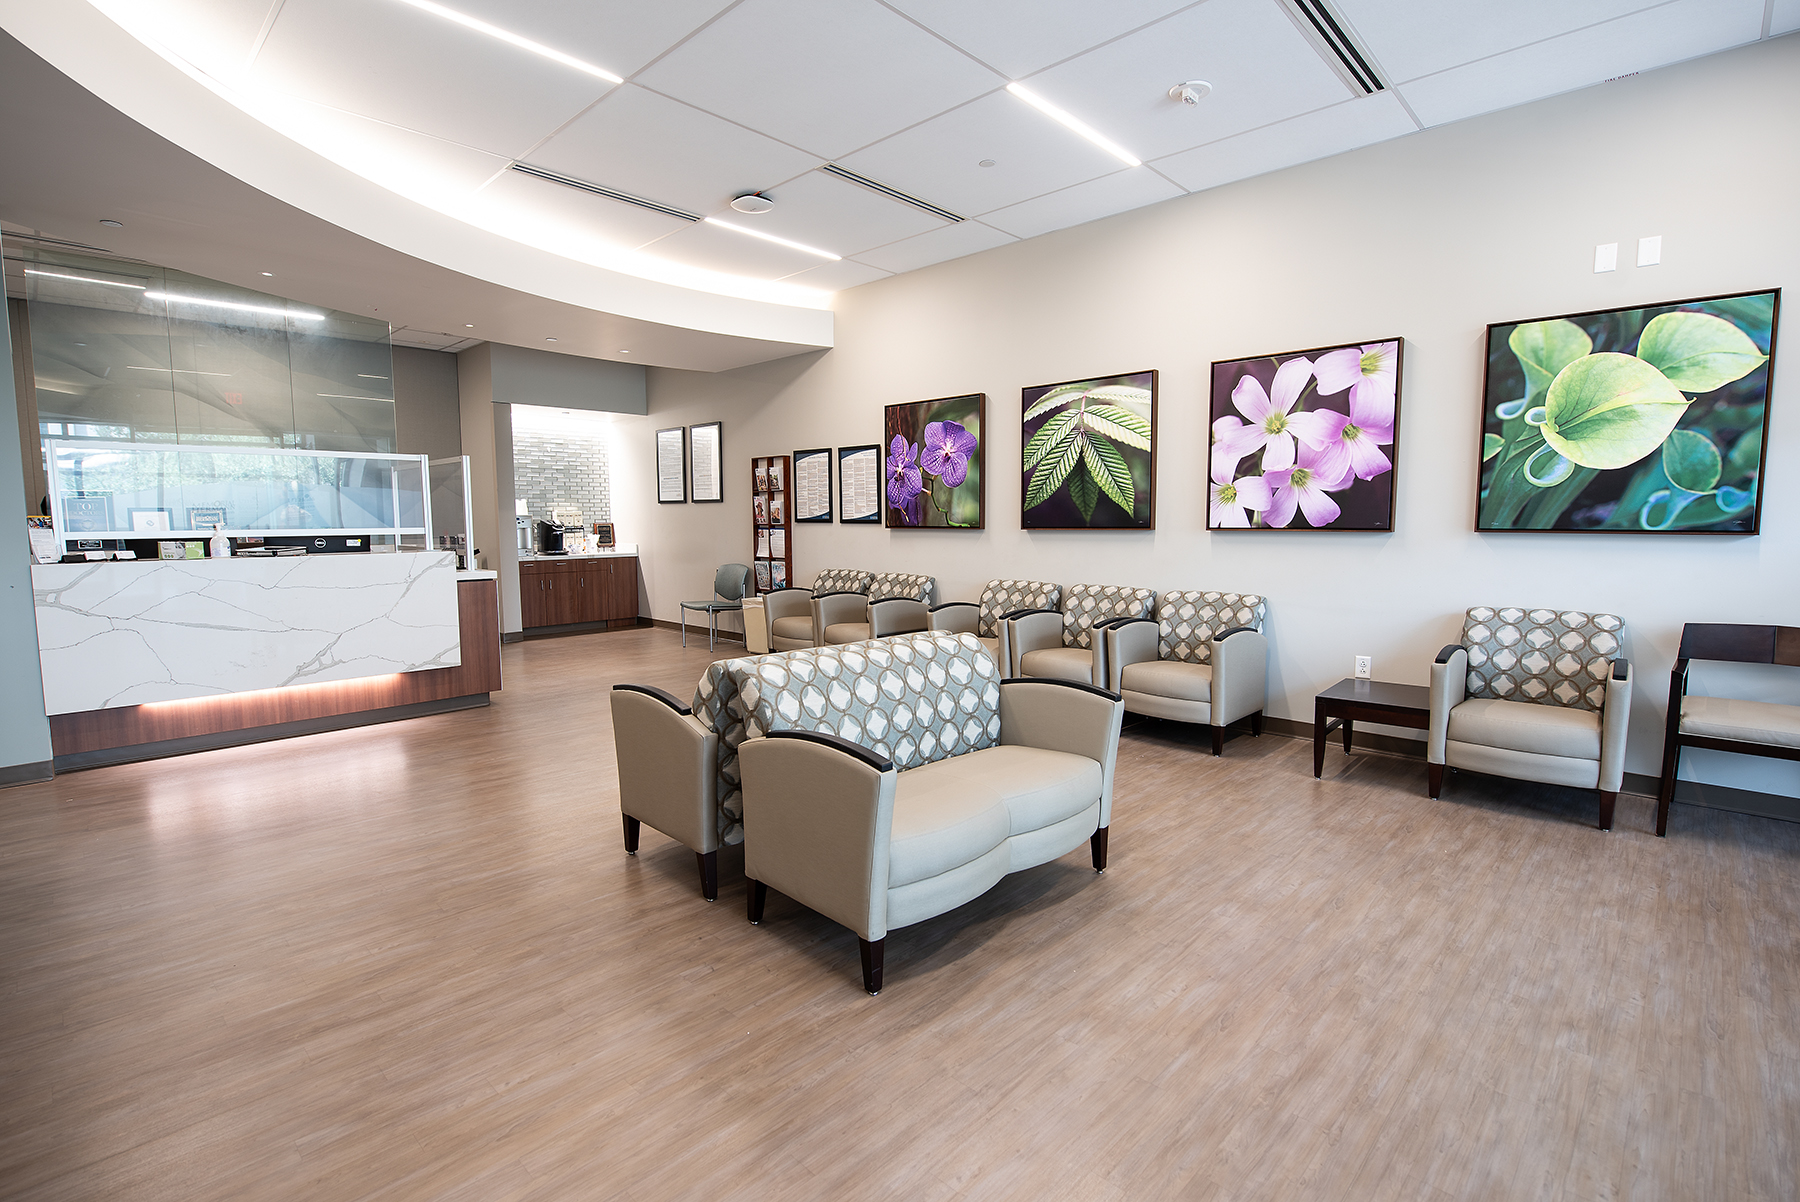 Radiation Therapy Waiting Area